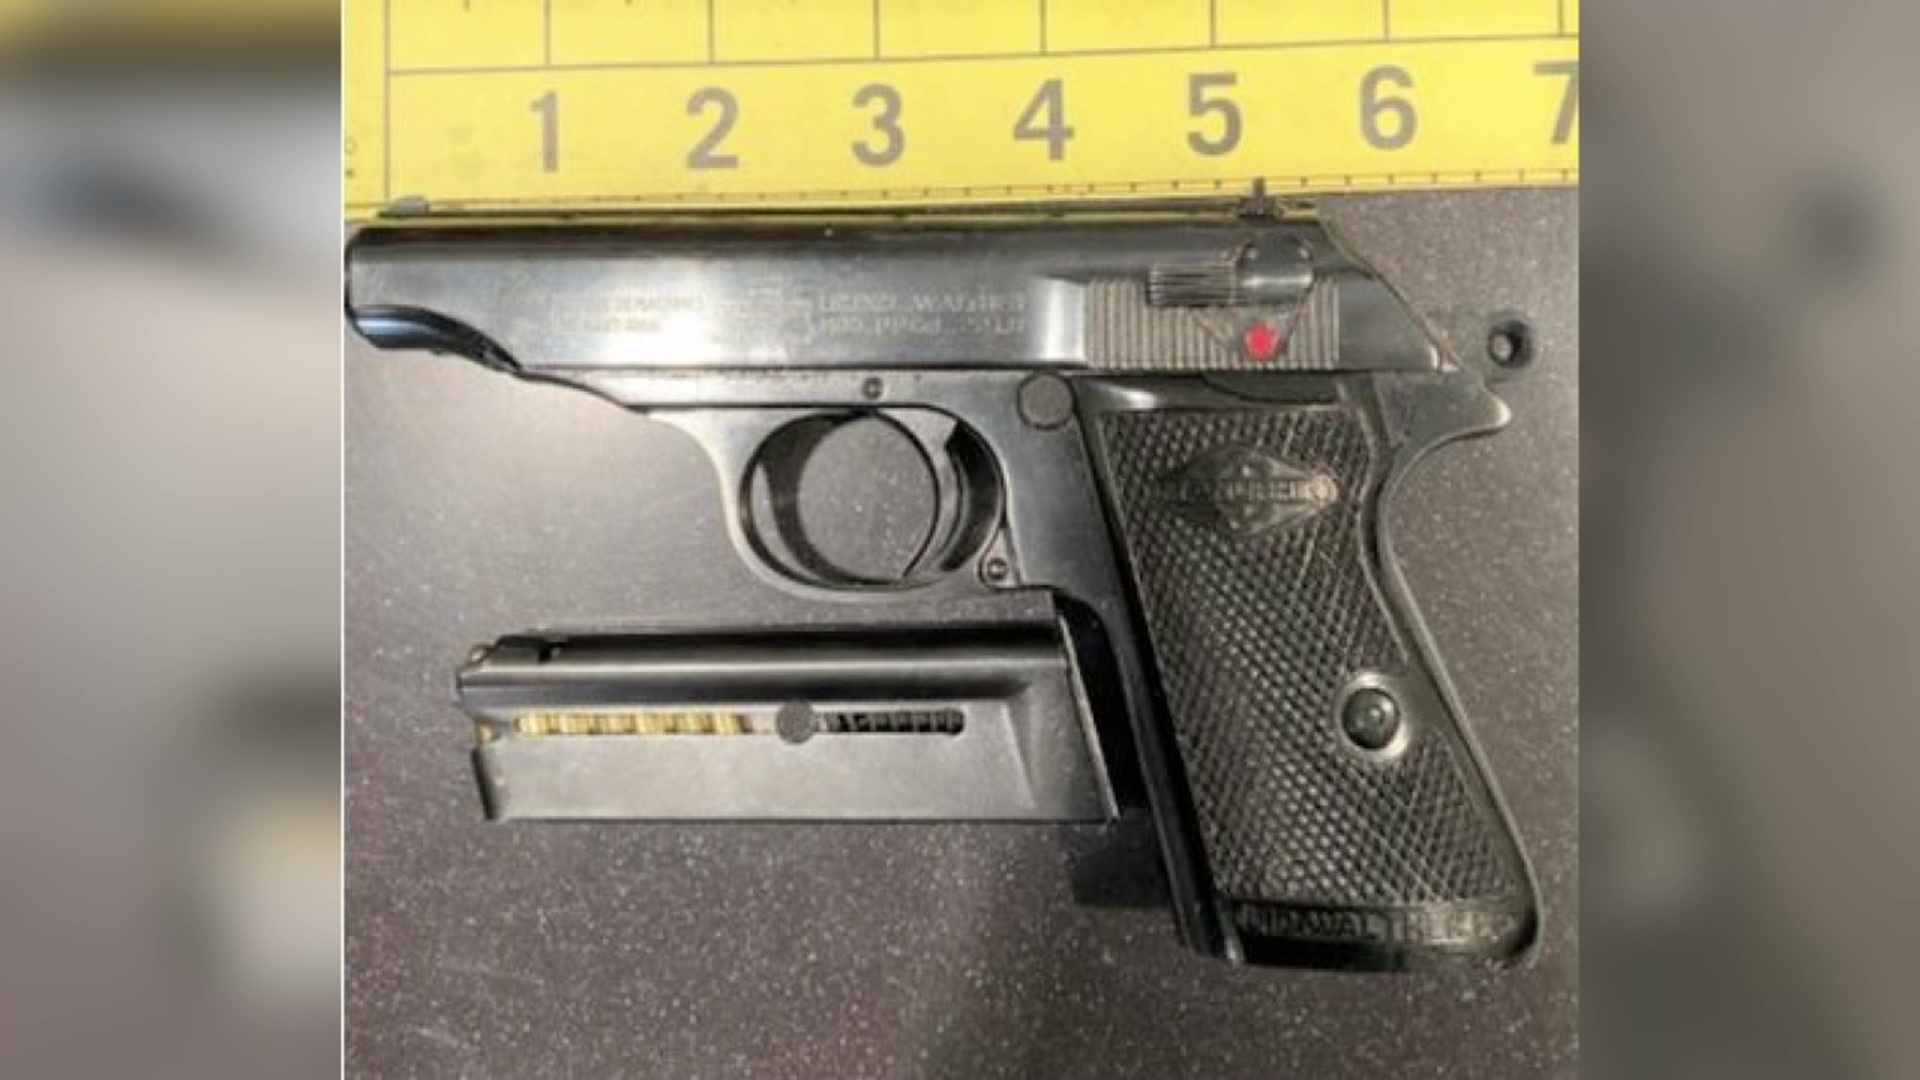 The woman from Tennessee had an unloaded .22-caliber handgun in her carry-on bag at the AVP.